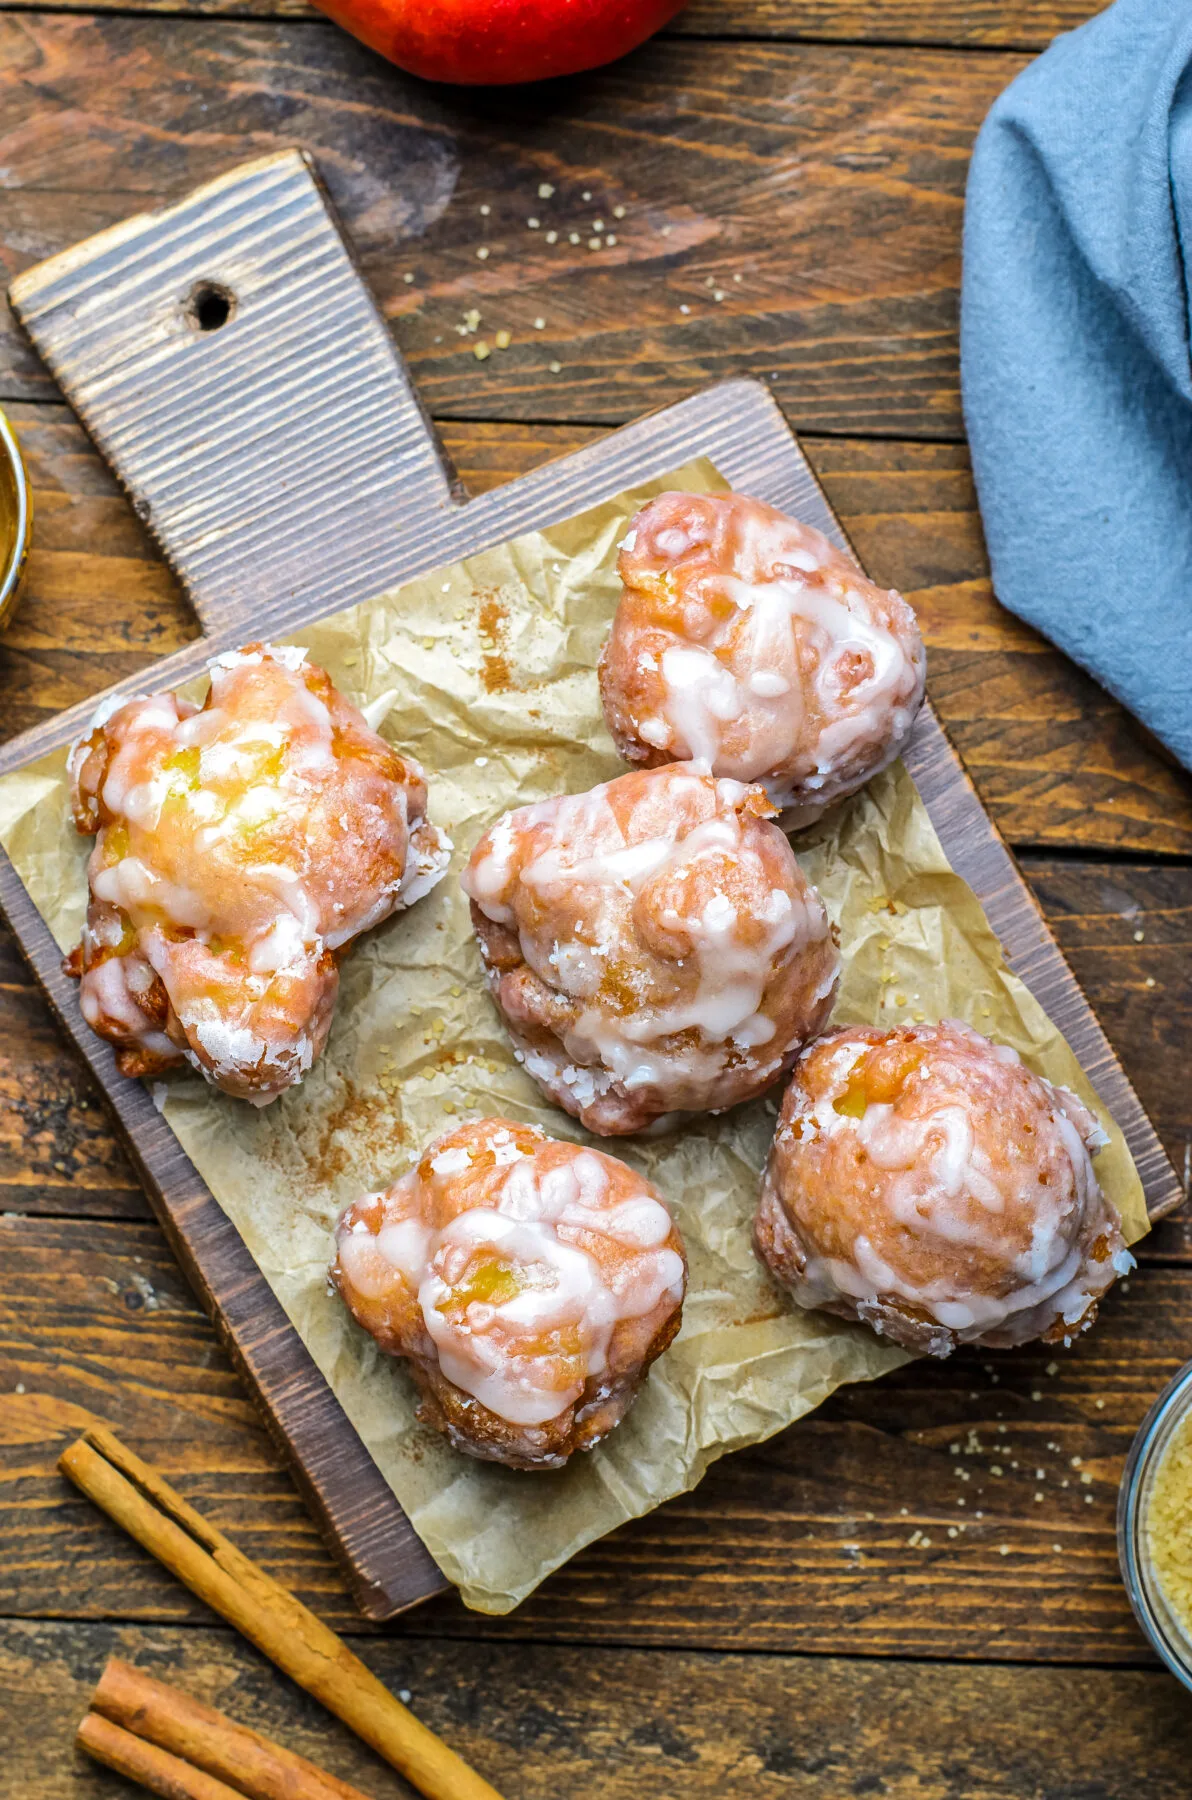 These Old Fashioned Apple Fritters are made with a cakey batter incorporated with juicy apples and glazed. They're an easy-to-make fall treat.